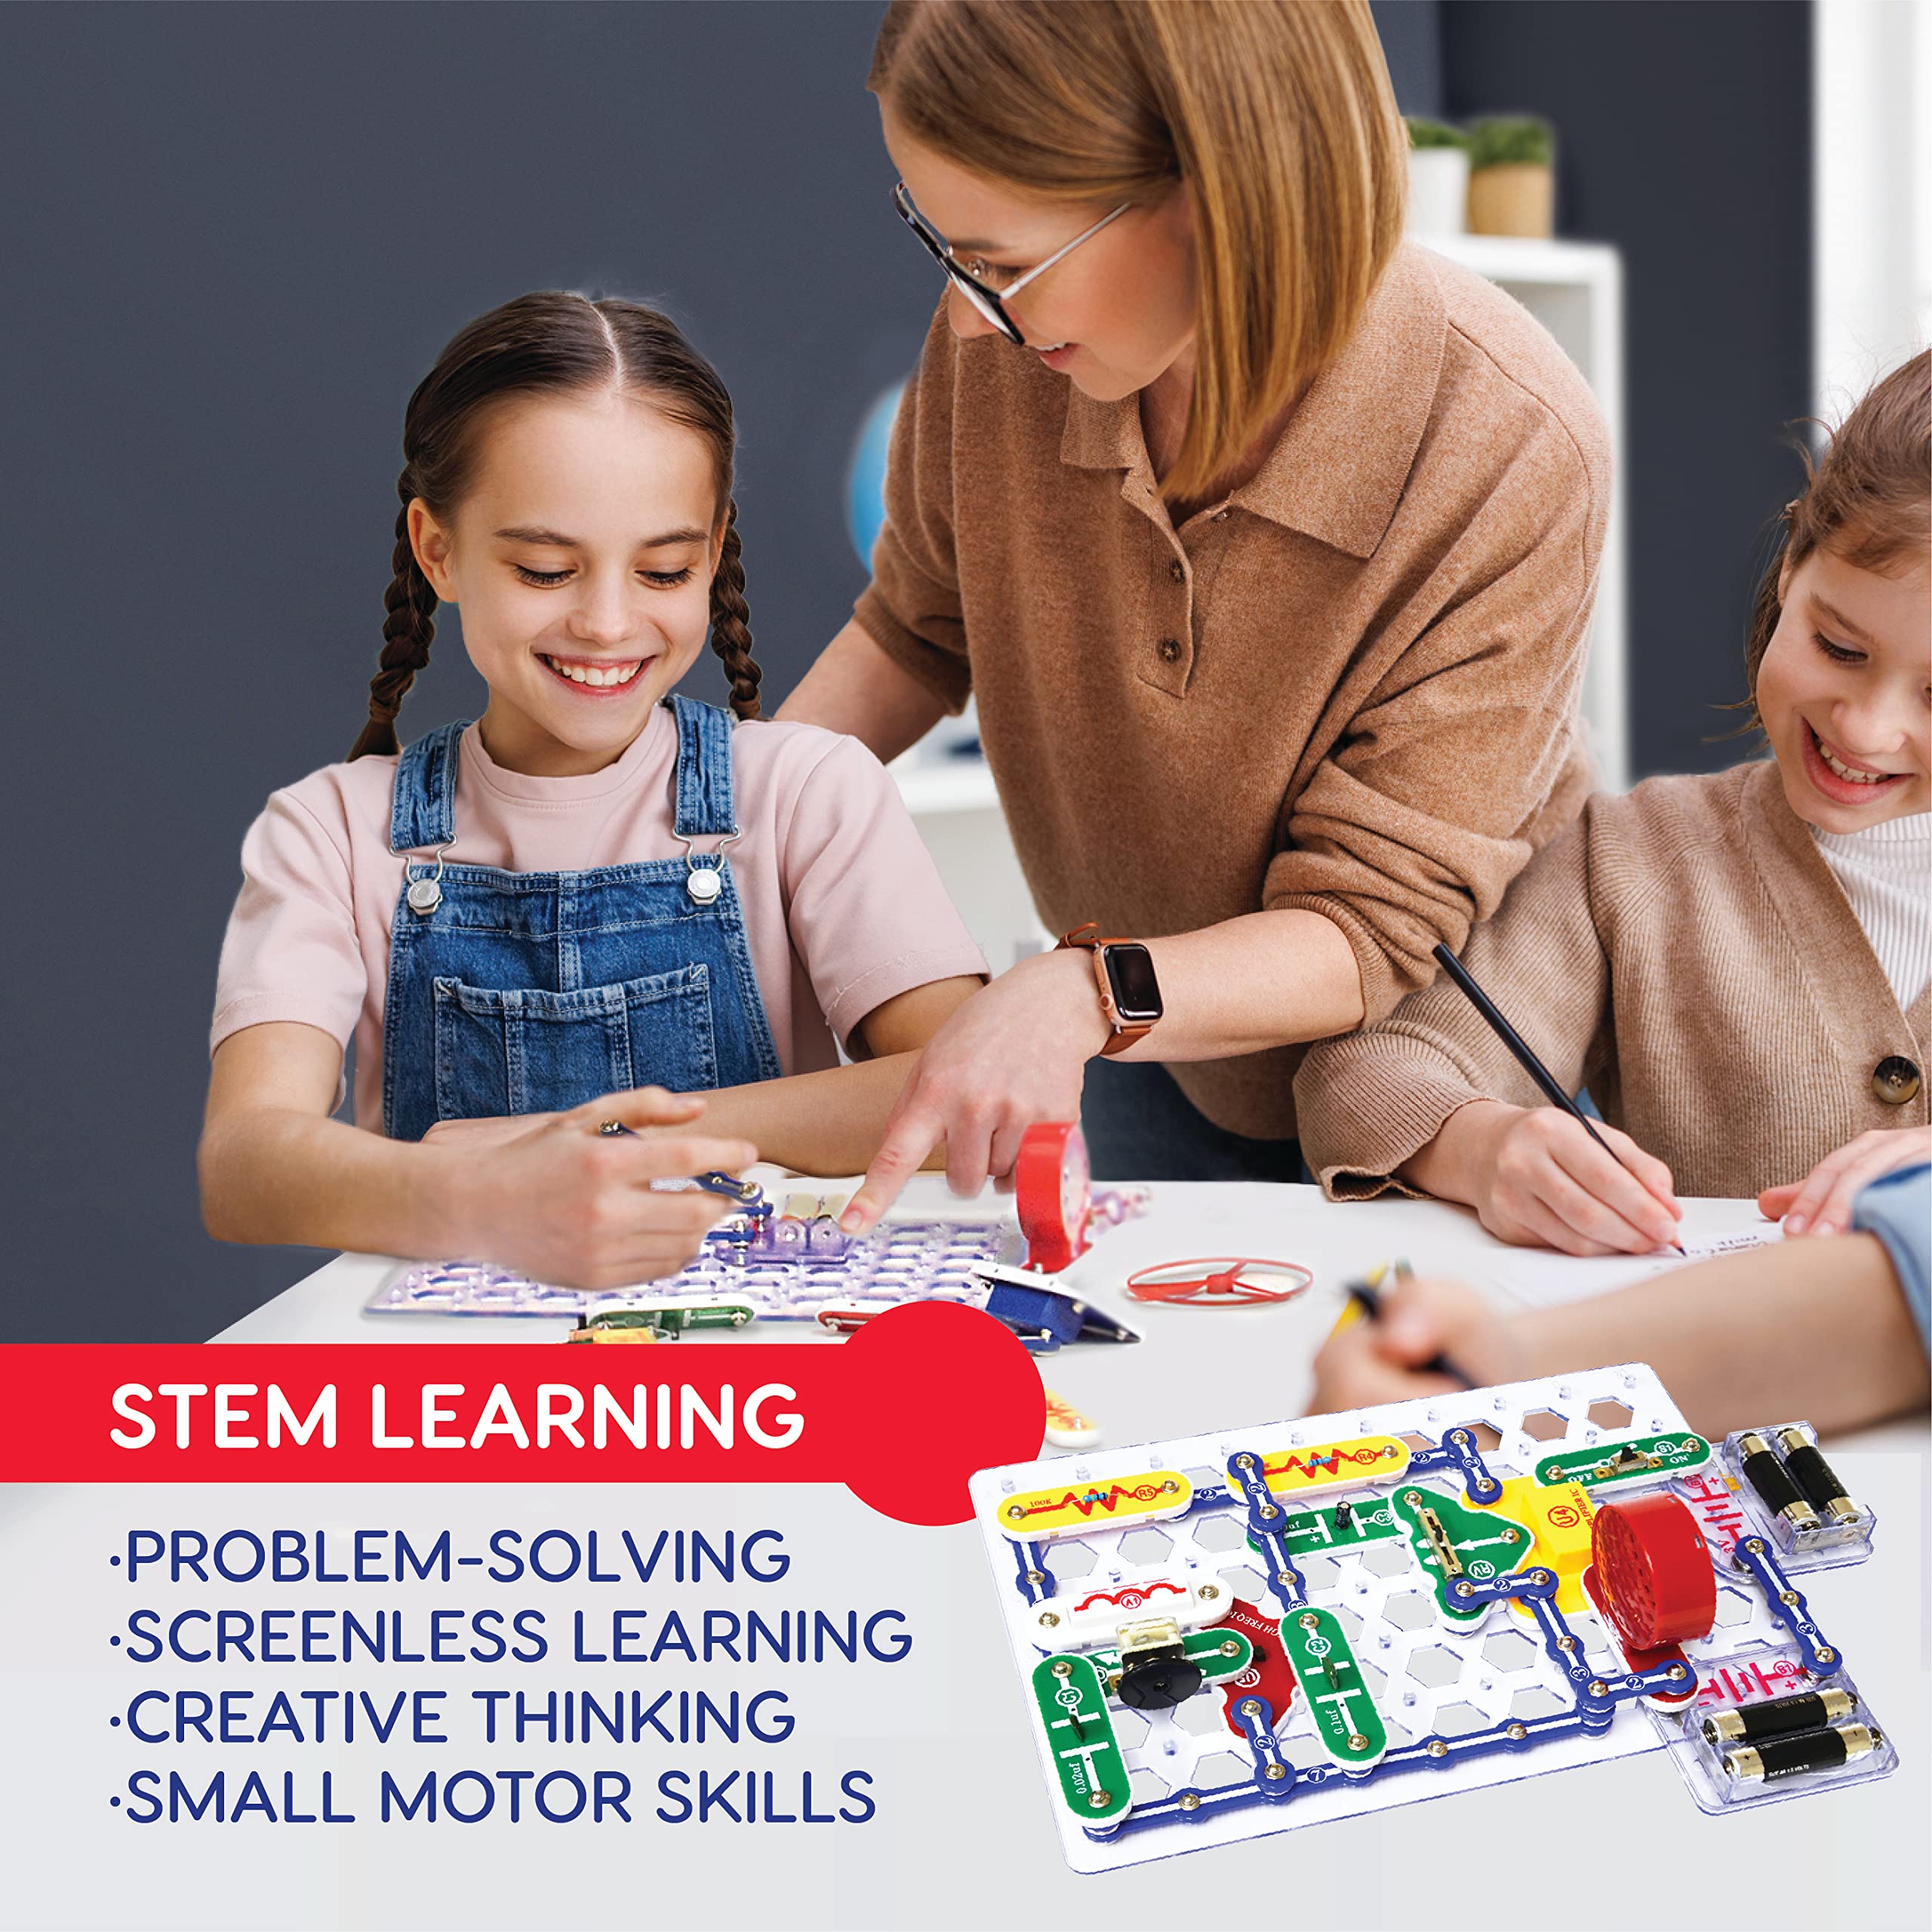 Snap Circuits Classic SC-300 Electronics Exploration Kit | Over 300 Projects | Full Color Project Manual | Snap Circuits Parts | STEM Educational Toy for Kids 8+ 2.3 x 13.6 x 19.3 inches